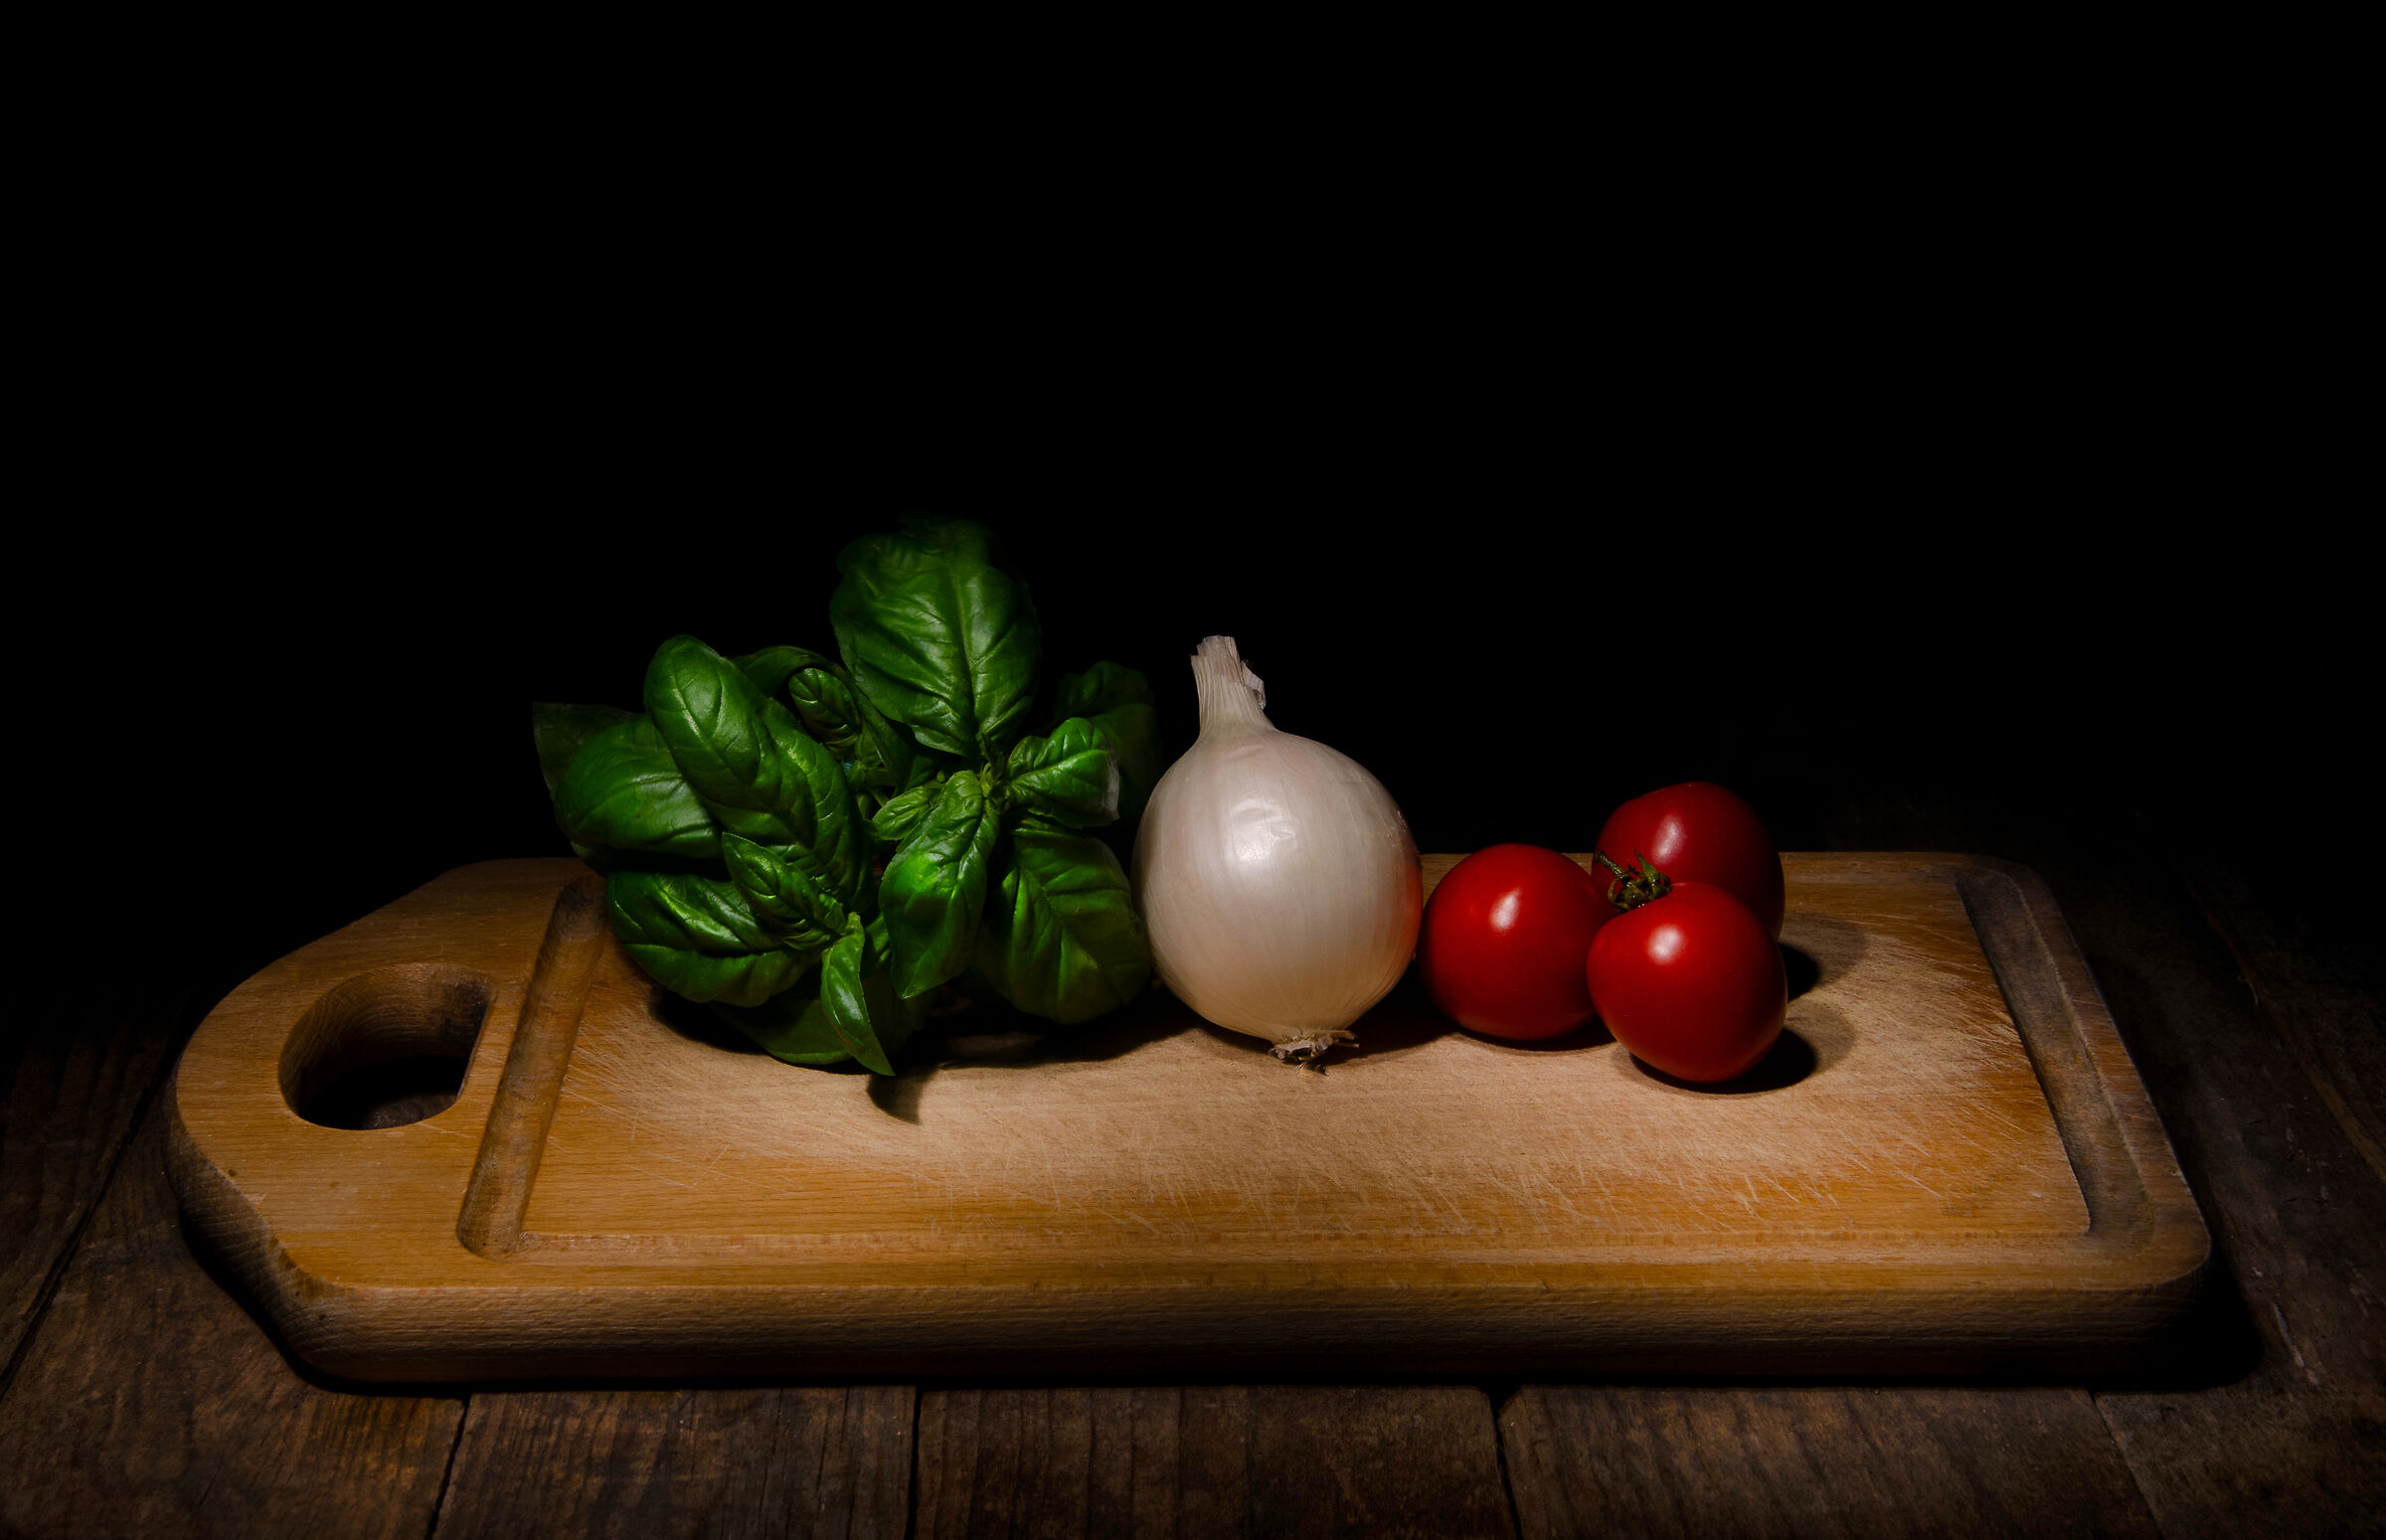 Tricolore in cucina ... Light Painting...